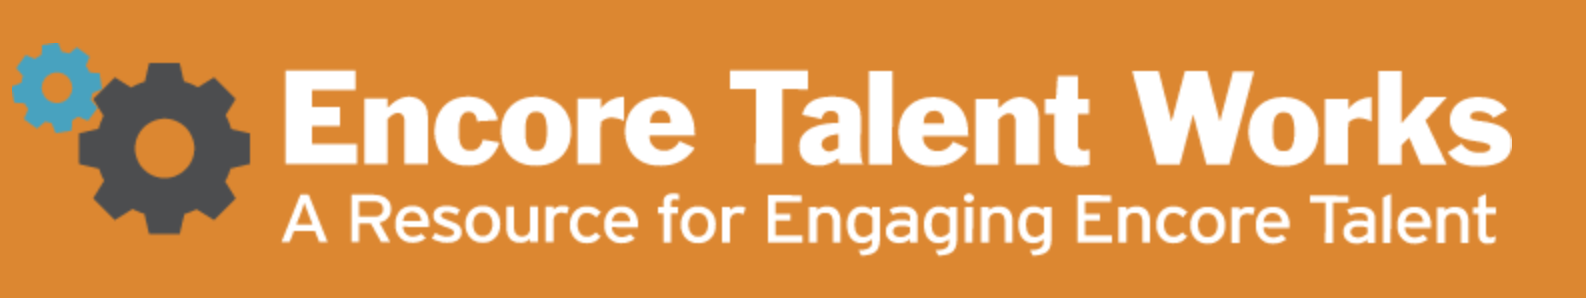 Encore Talent Works A Resource for Engaging Encore Talent